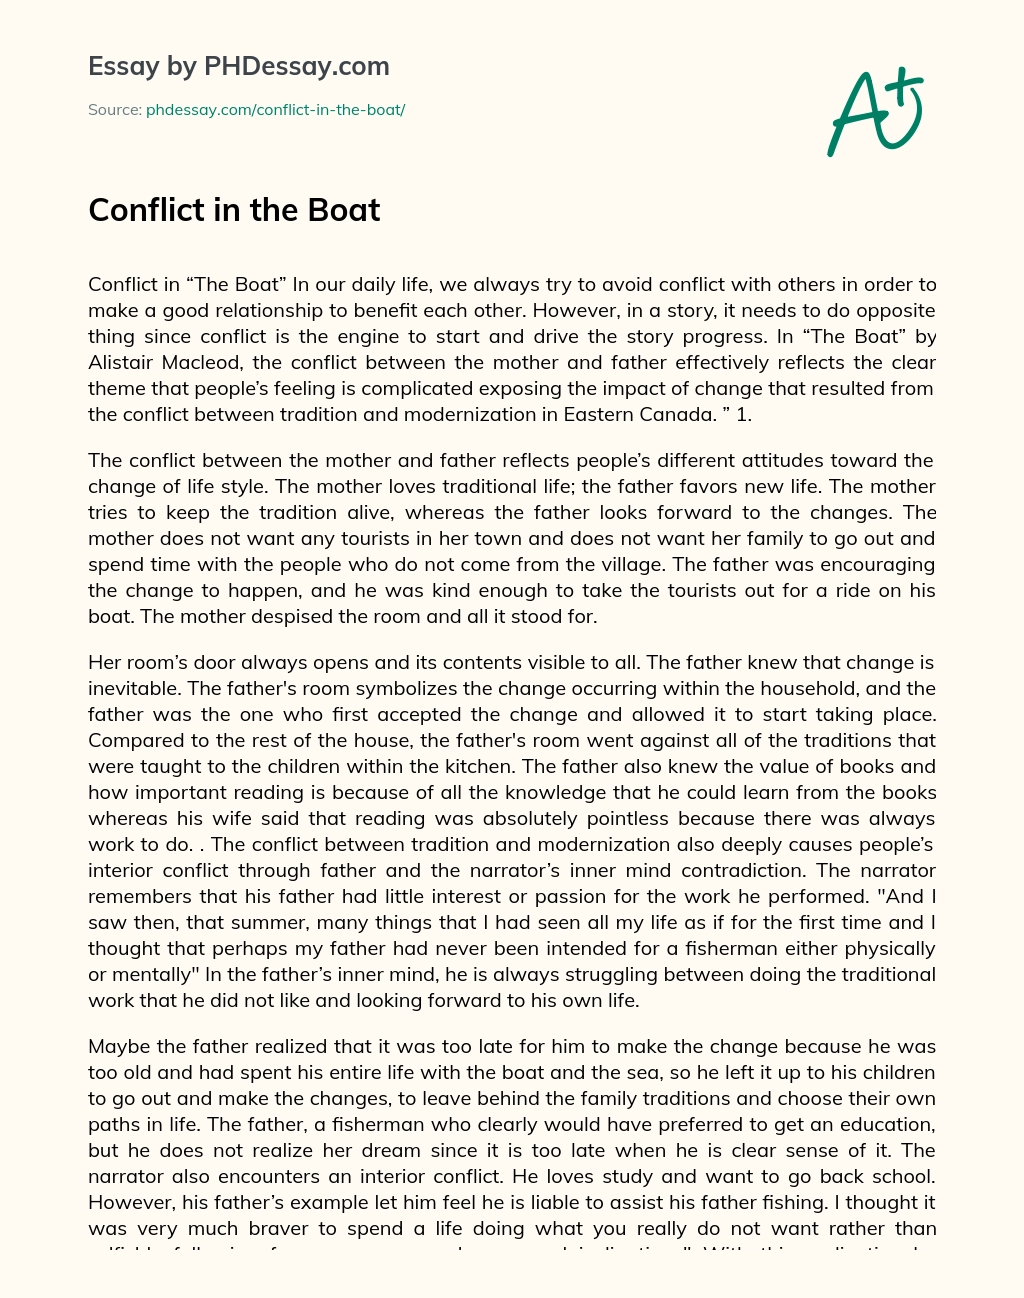 Conflict in the Boat essay